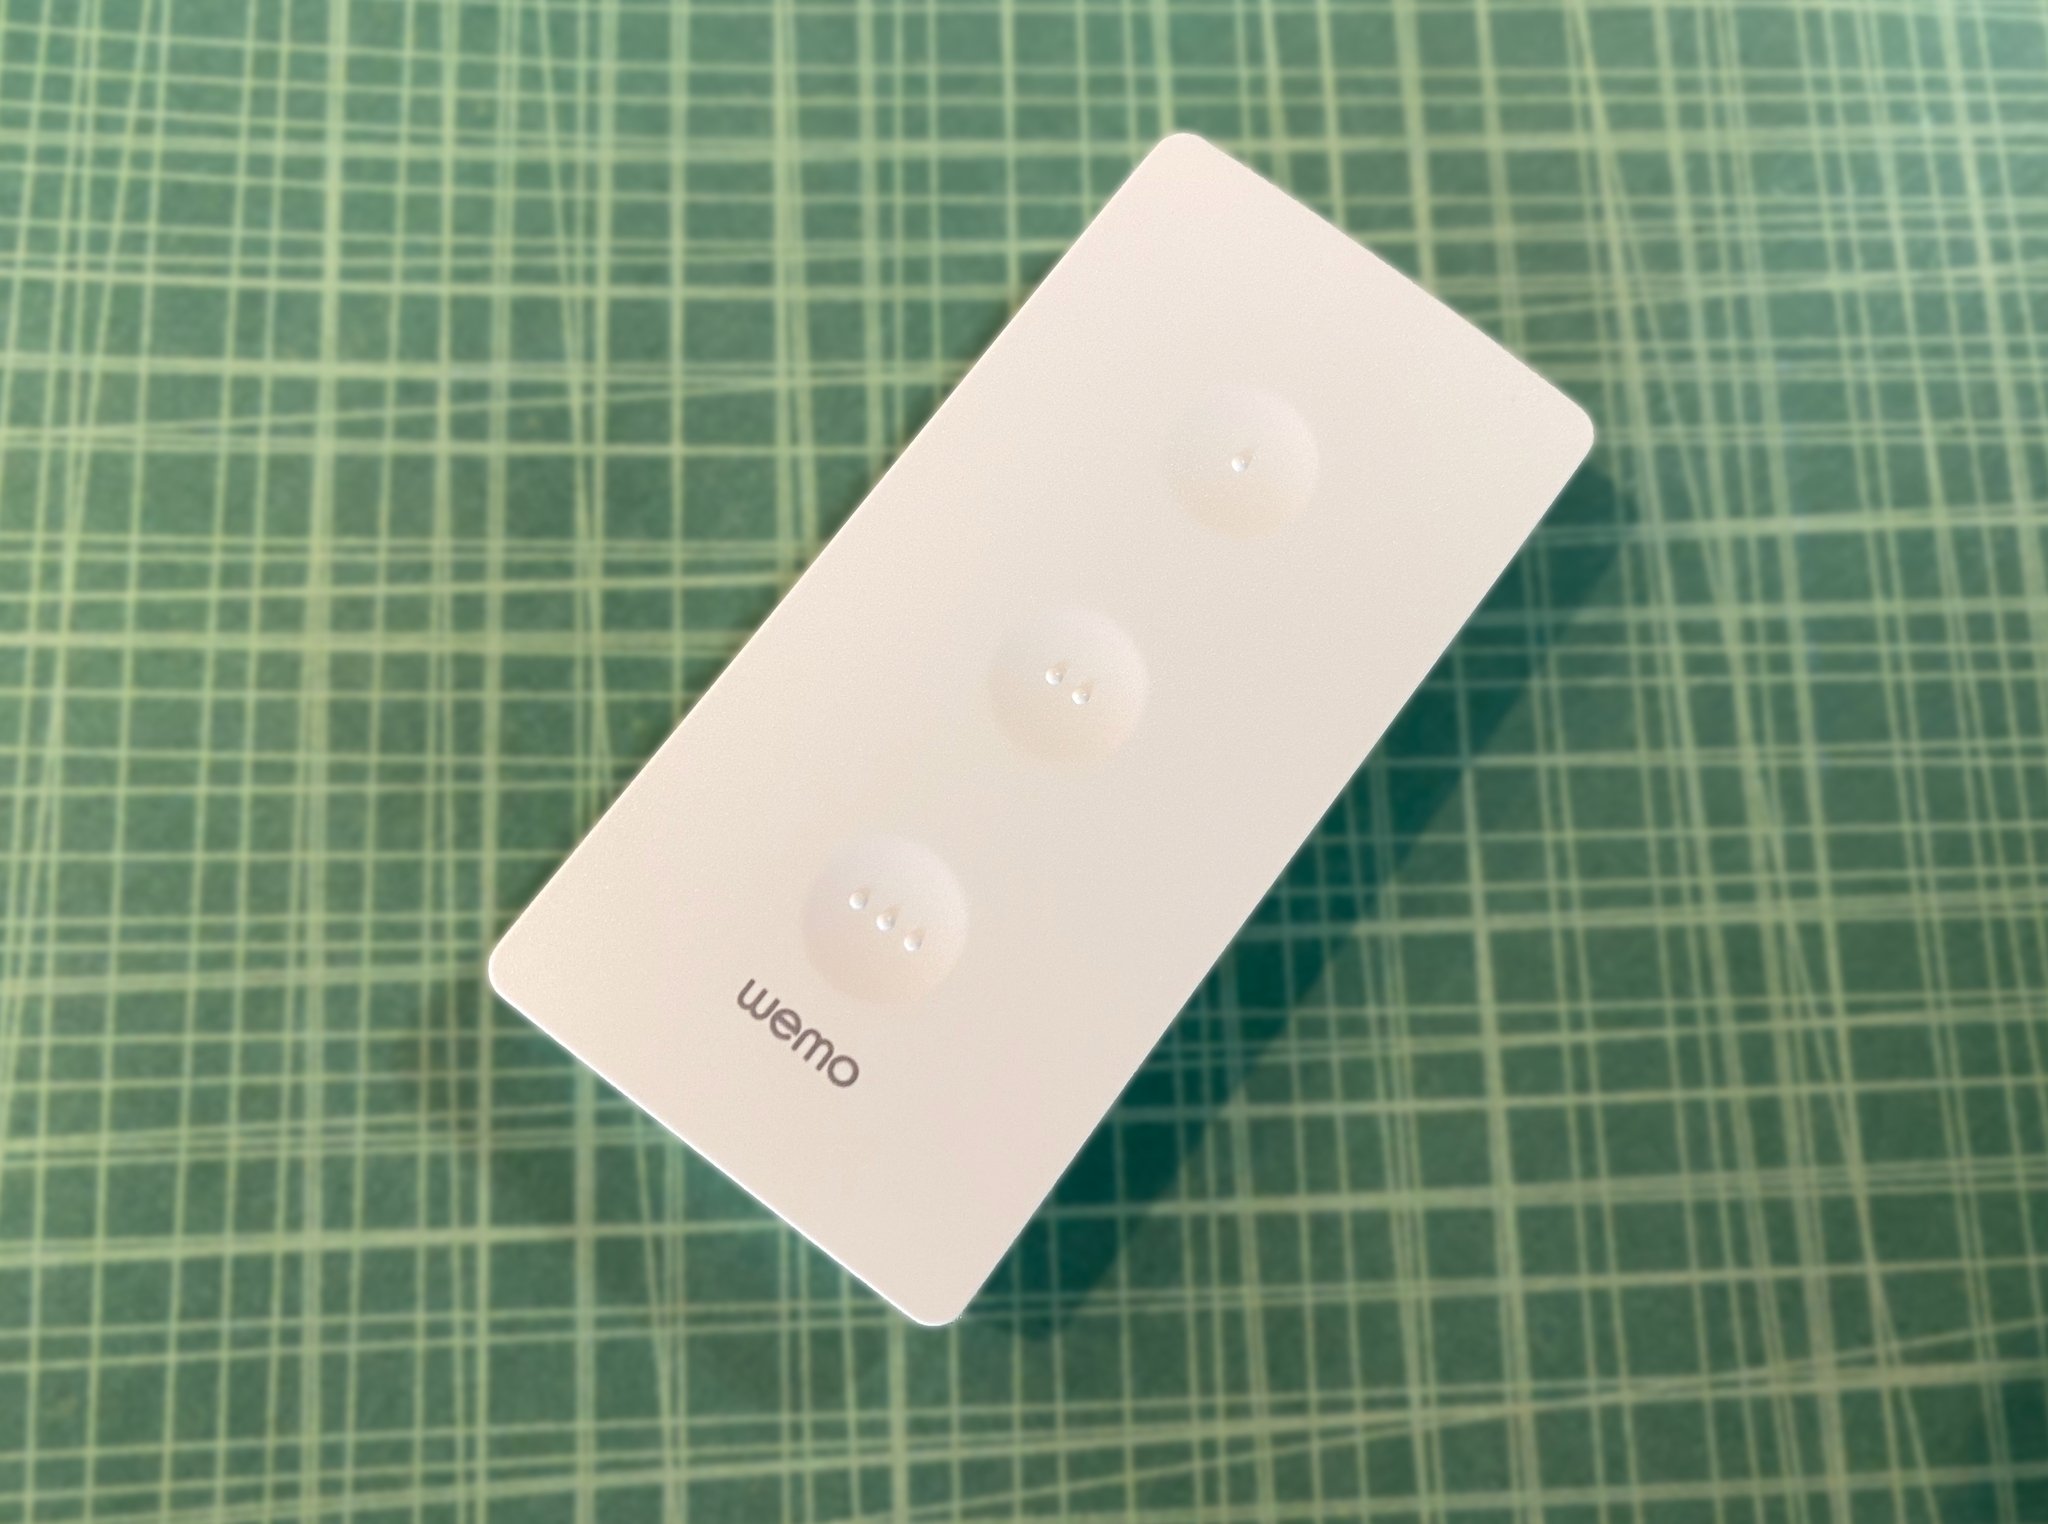 Wemo Stage Scene Controller Review Front